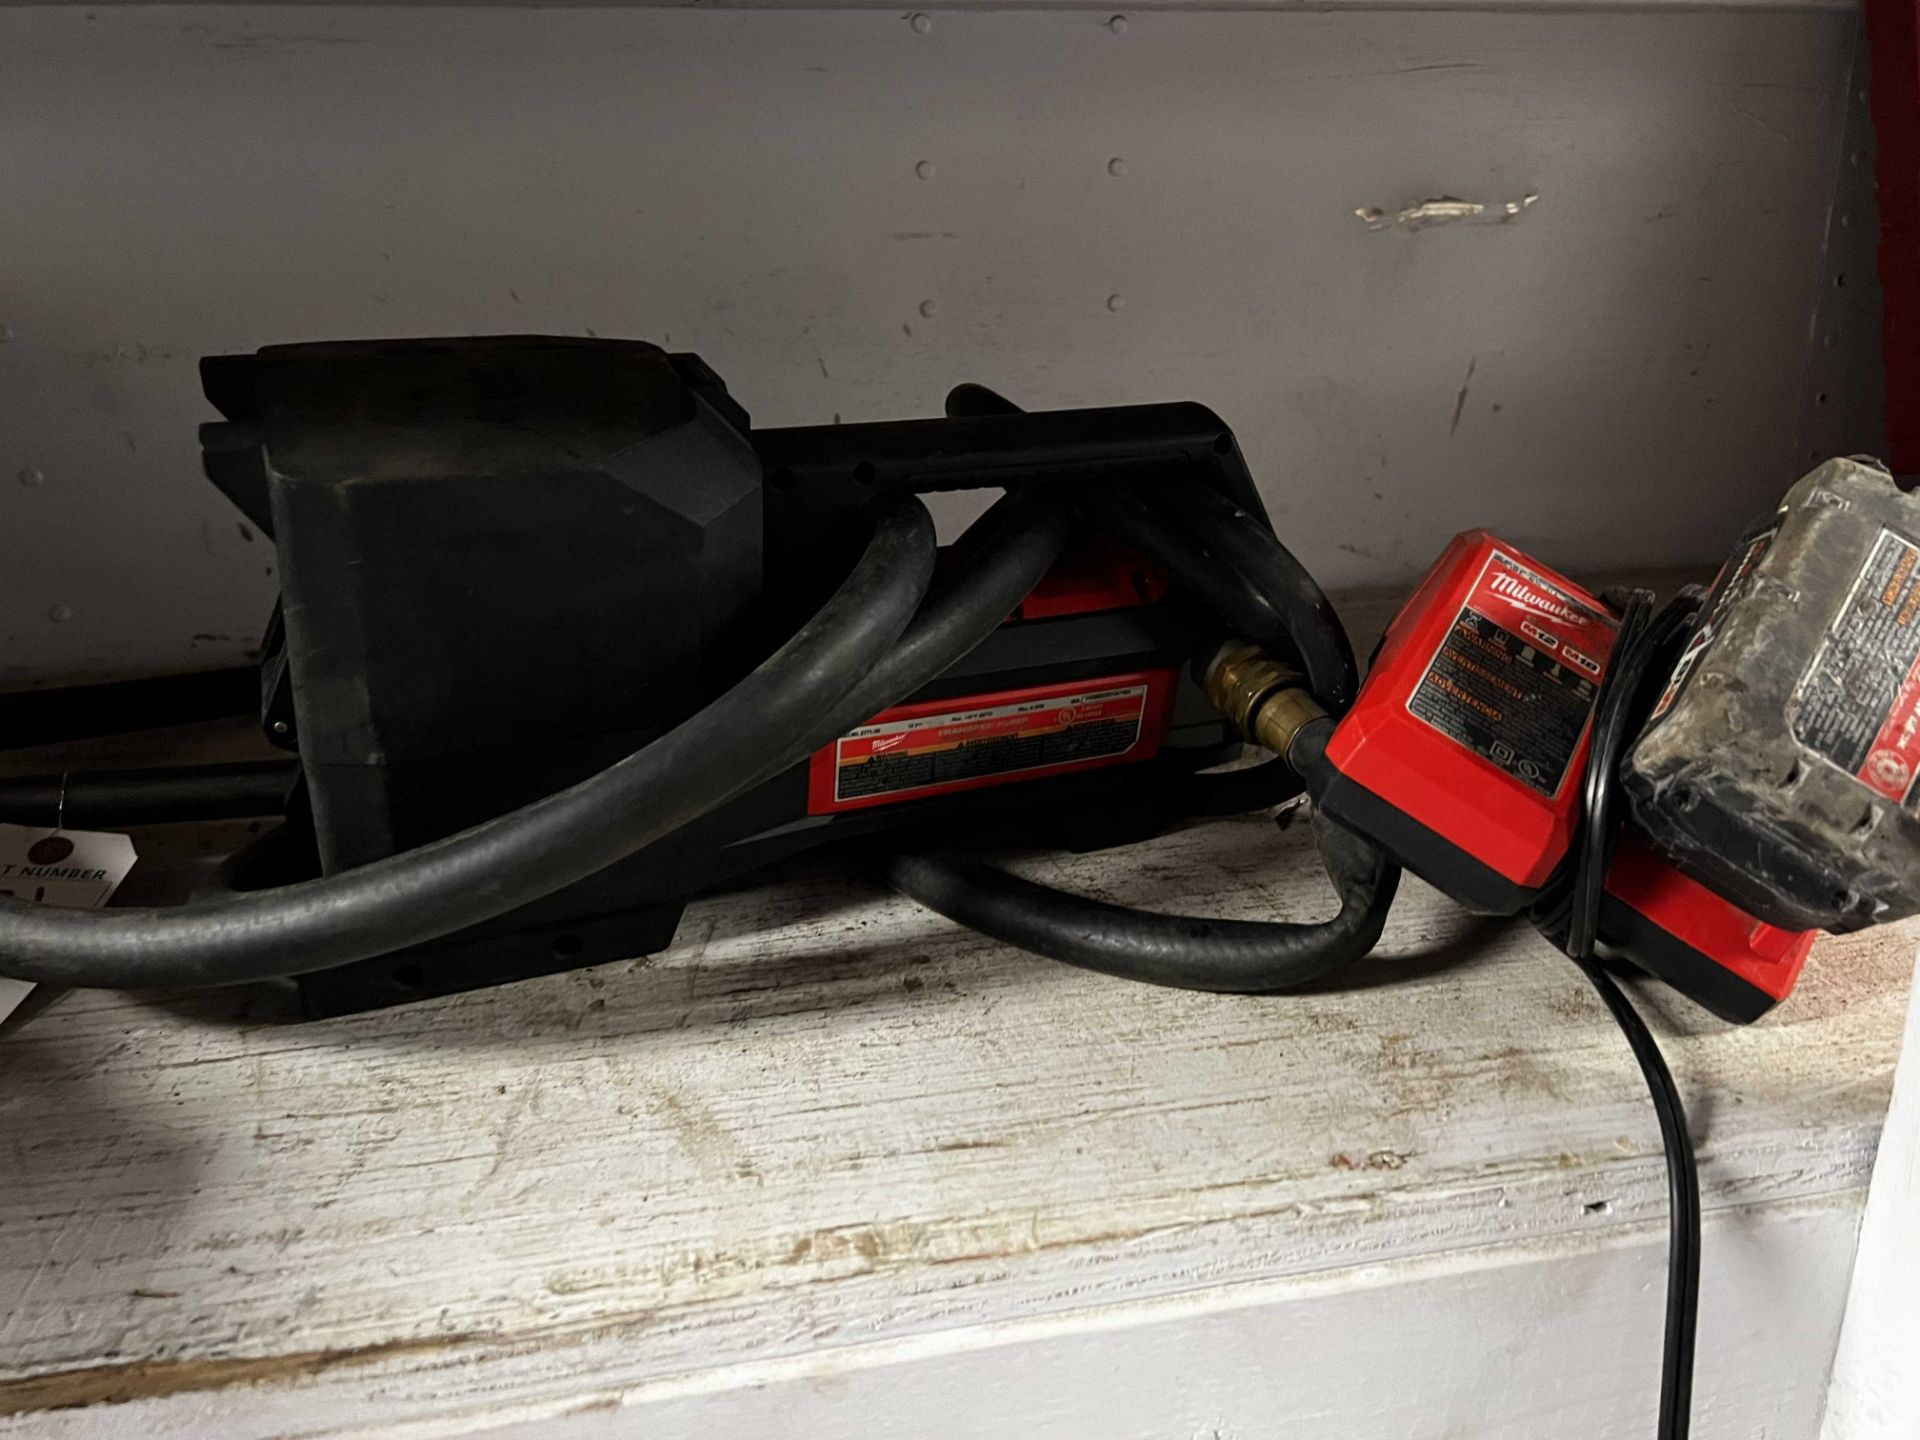 Milwaukee #2771-20 18V Transfer Pump - 8gpm w/(2) Batteries, Charger (Powers On) - Image 2 of 3